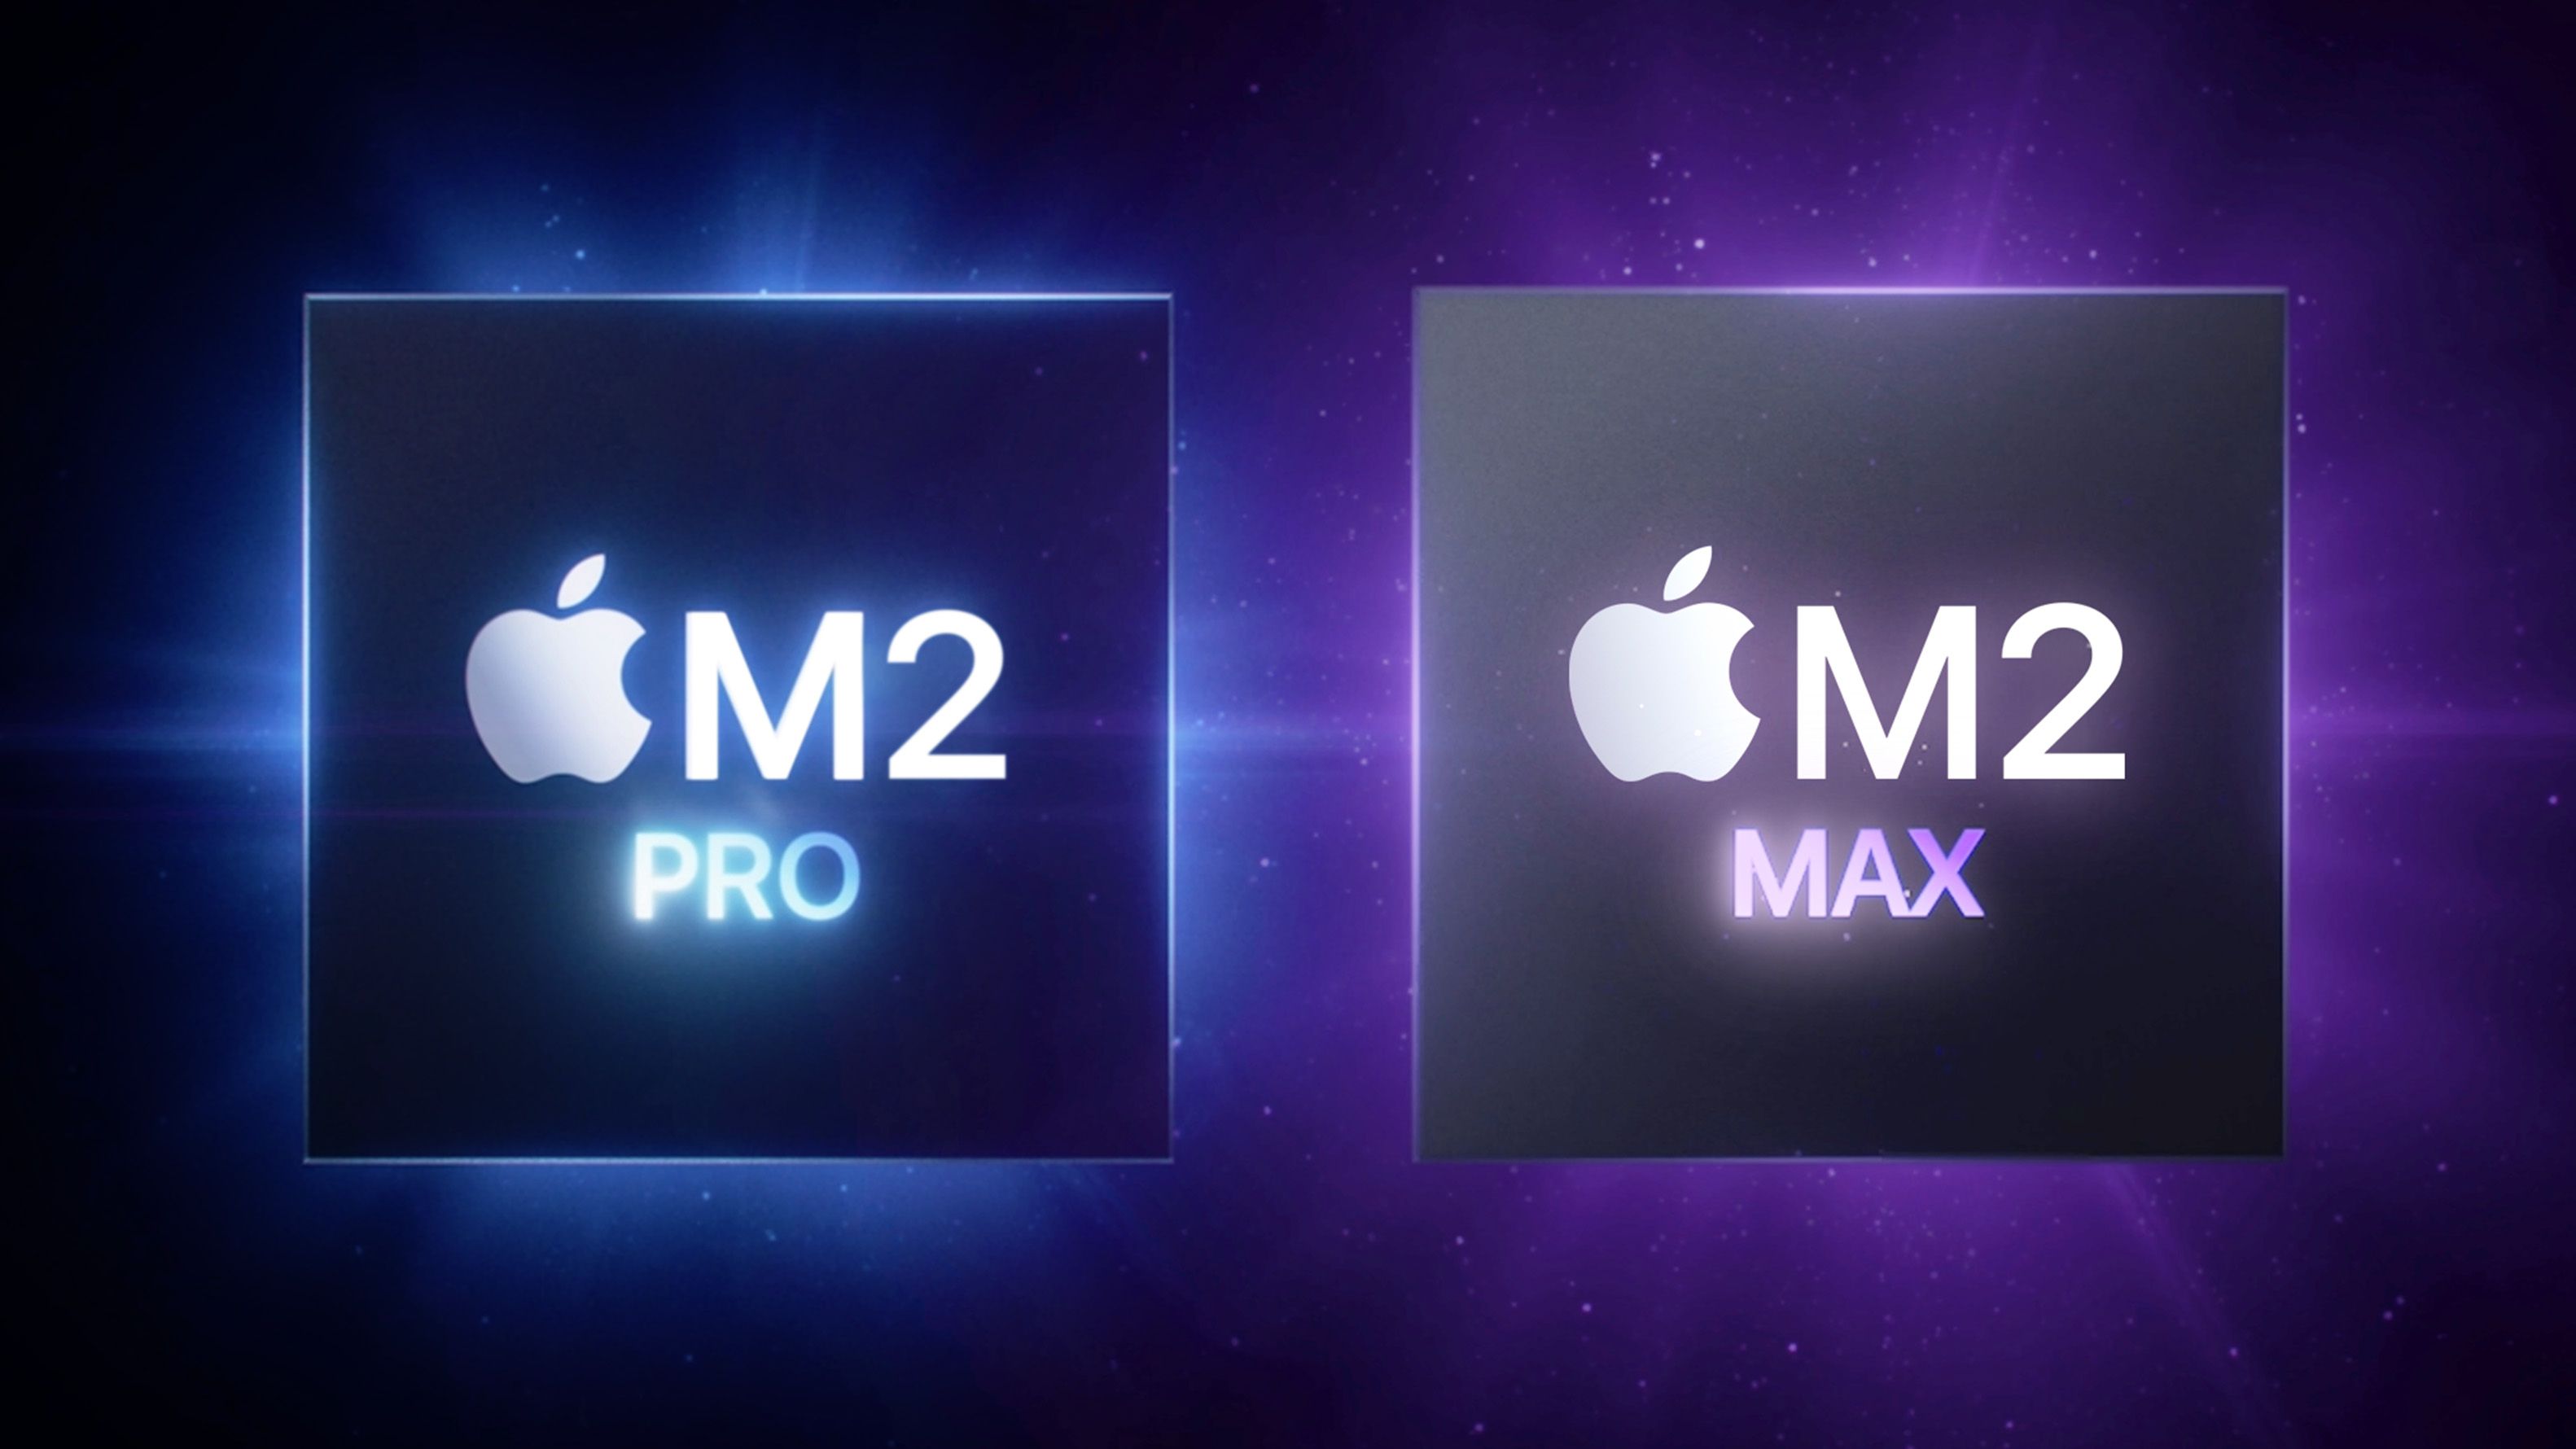 Apple Readying M2 Pro and M2 Max Chips for Next-Gen MacBook Pro - MacRumors